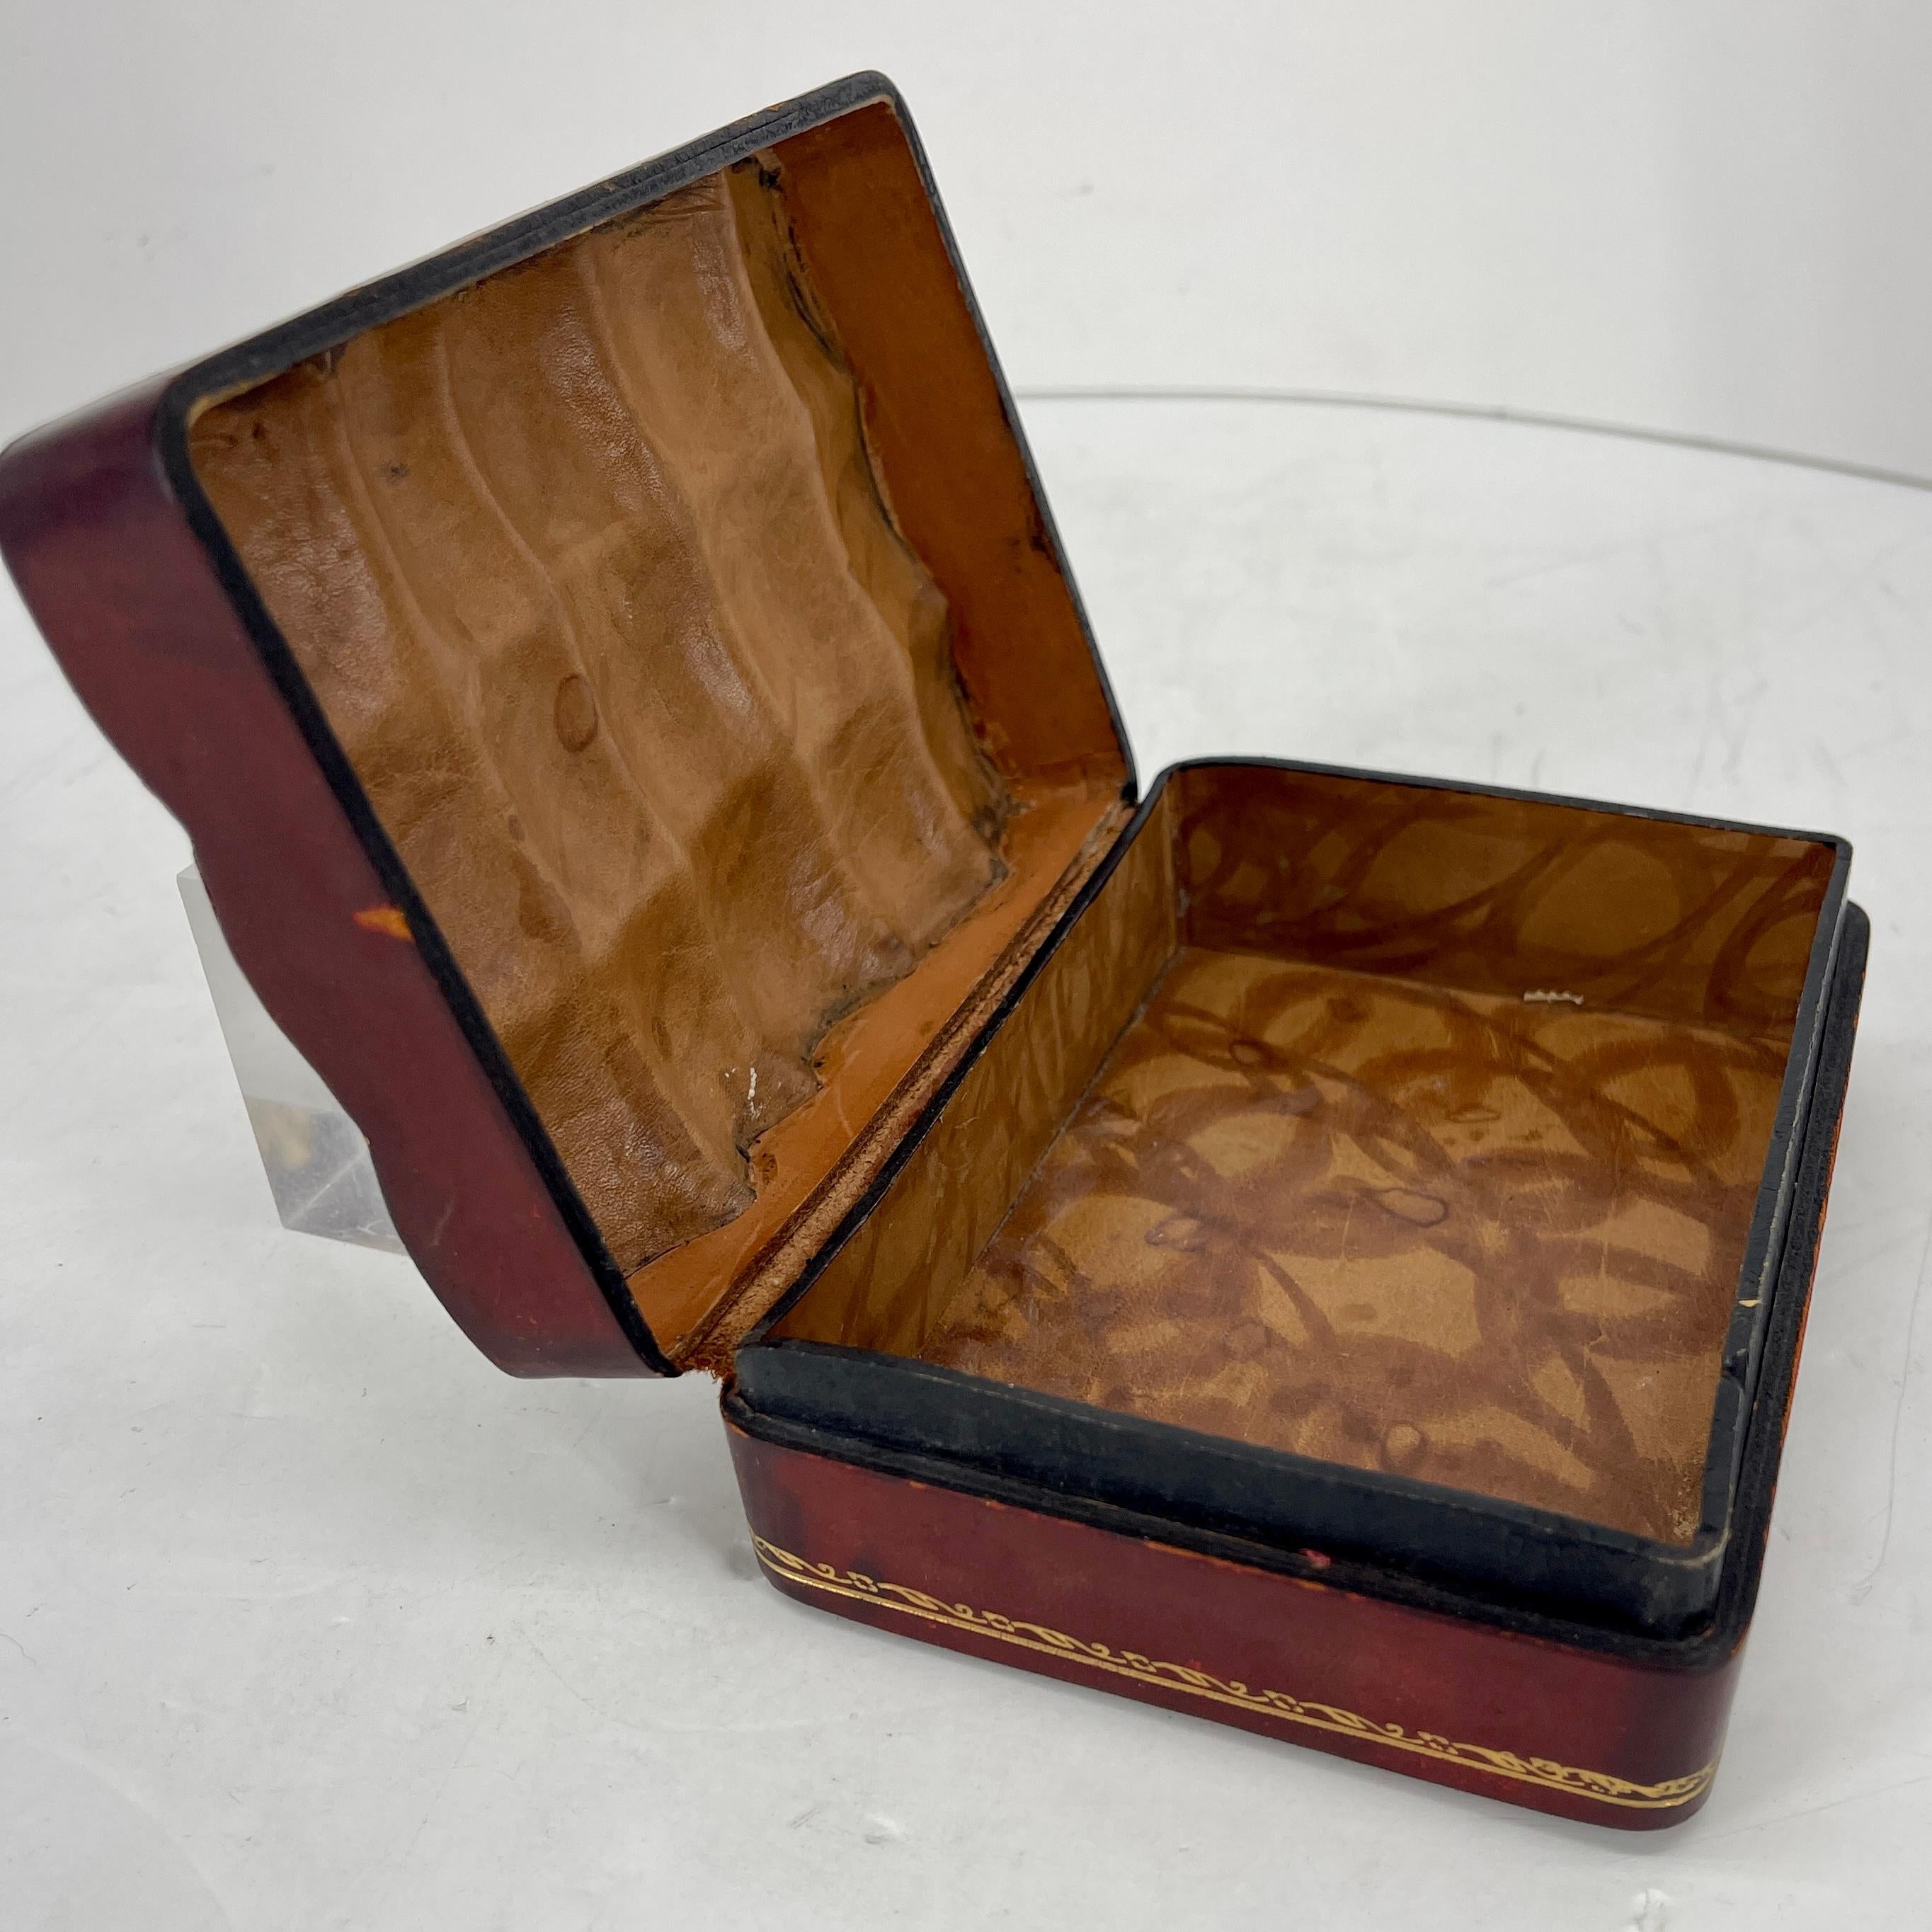 Vintage Italian Jewelry Box in Burgundy Leather, Circa 1950's For Sale 5